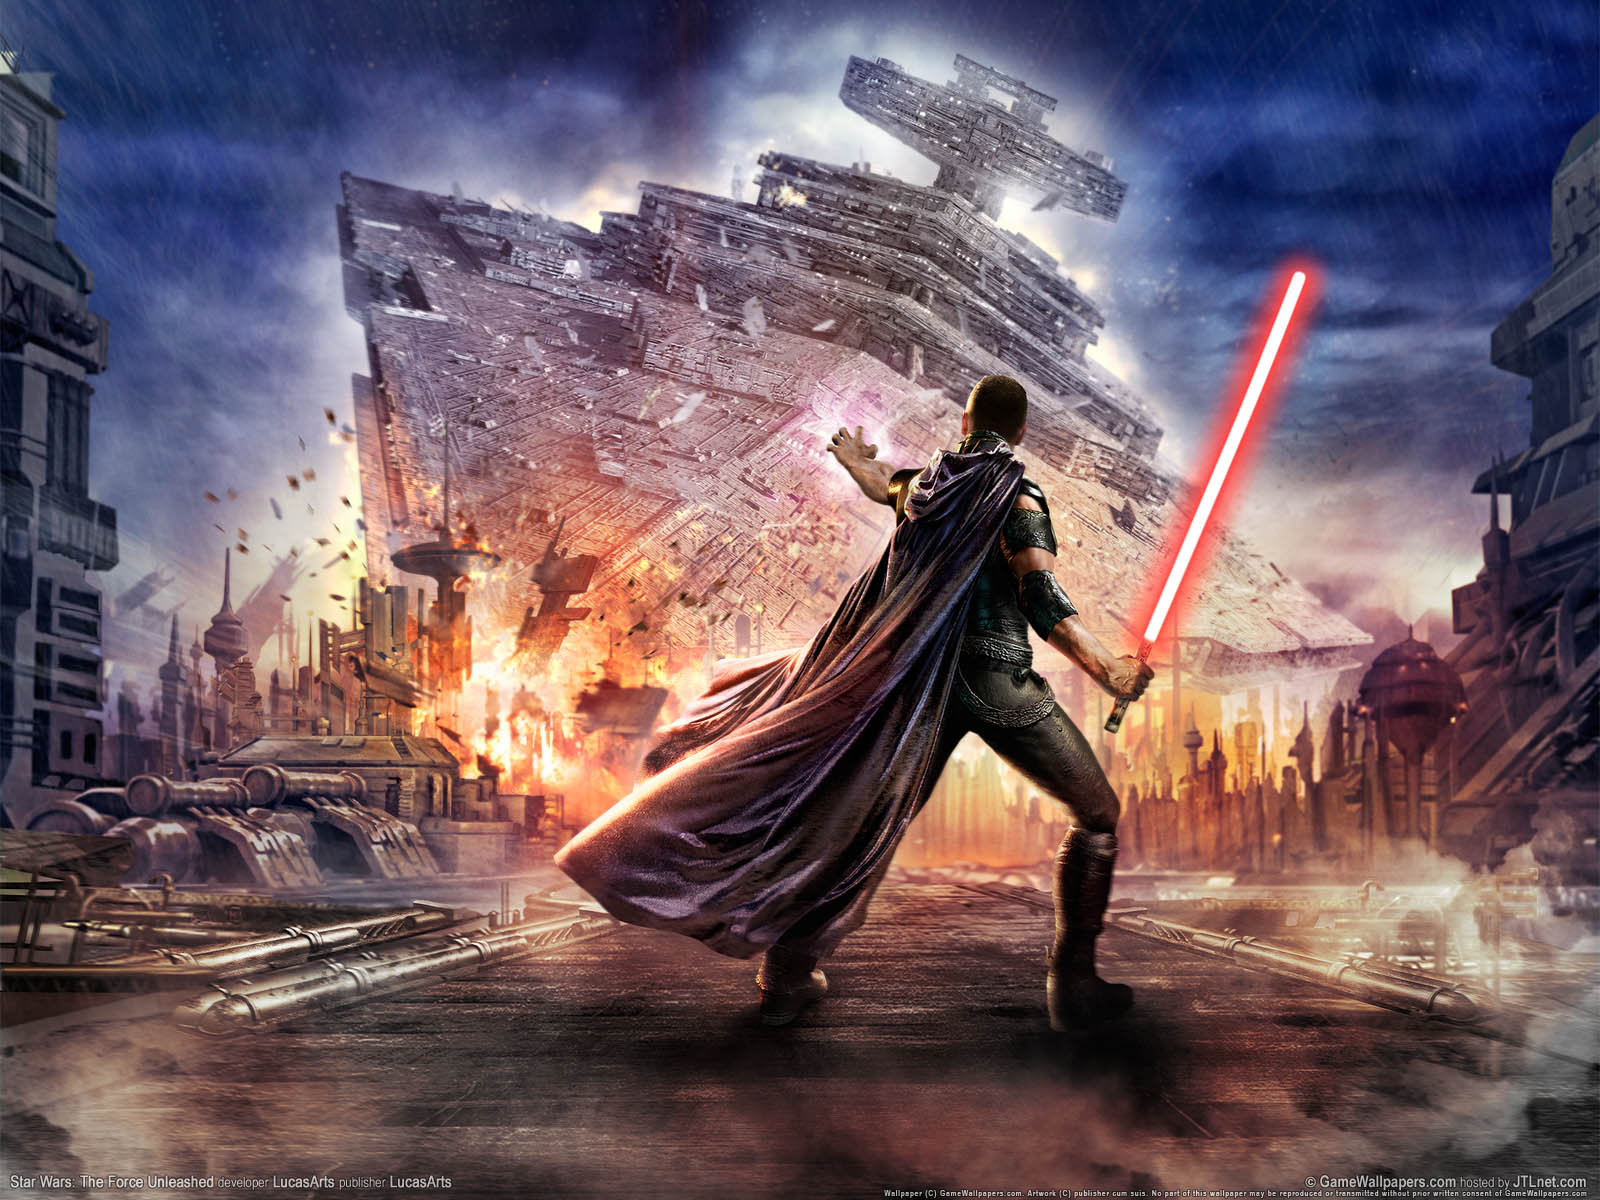 Star Wars%253A The Force Unleashed achtergrond 04 1600x1200